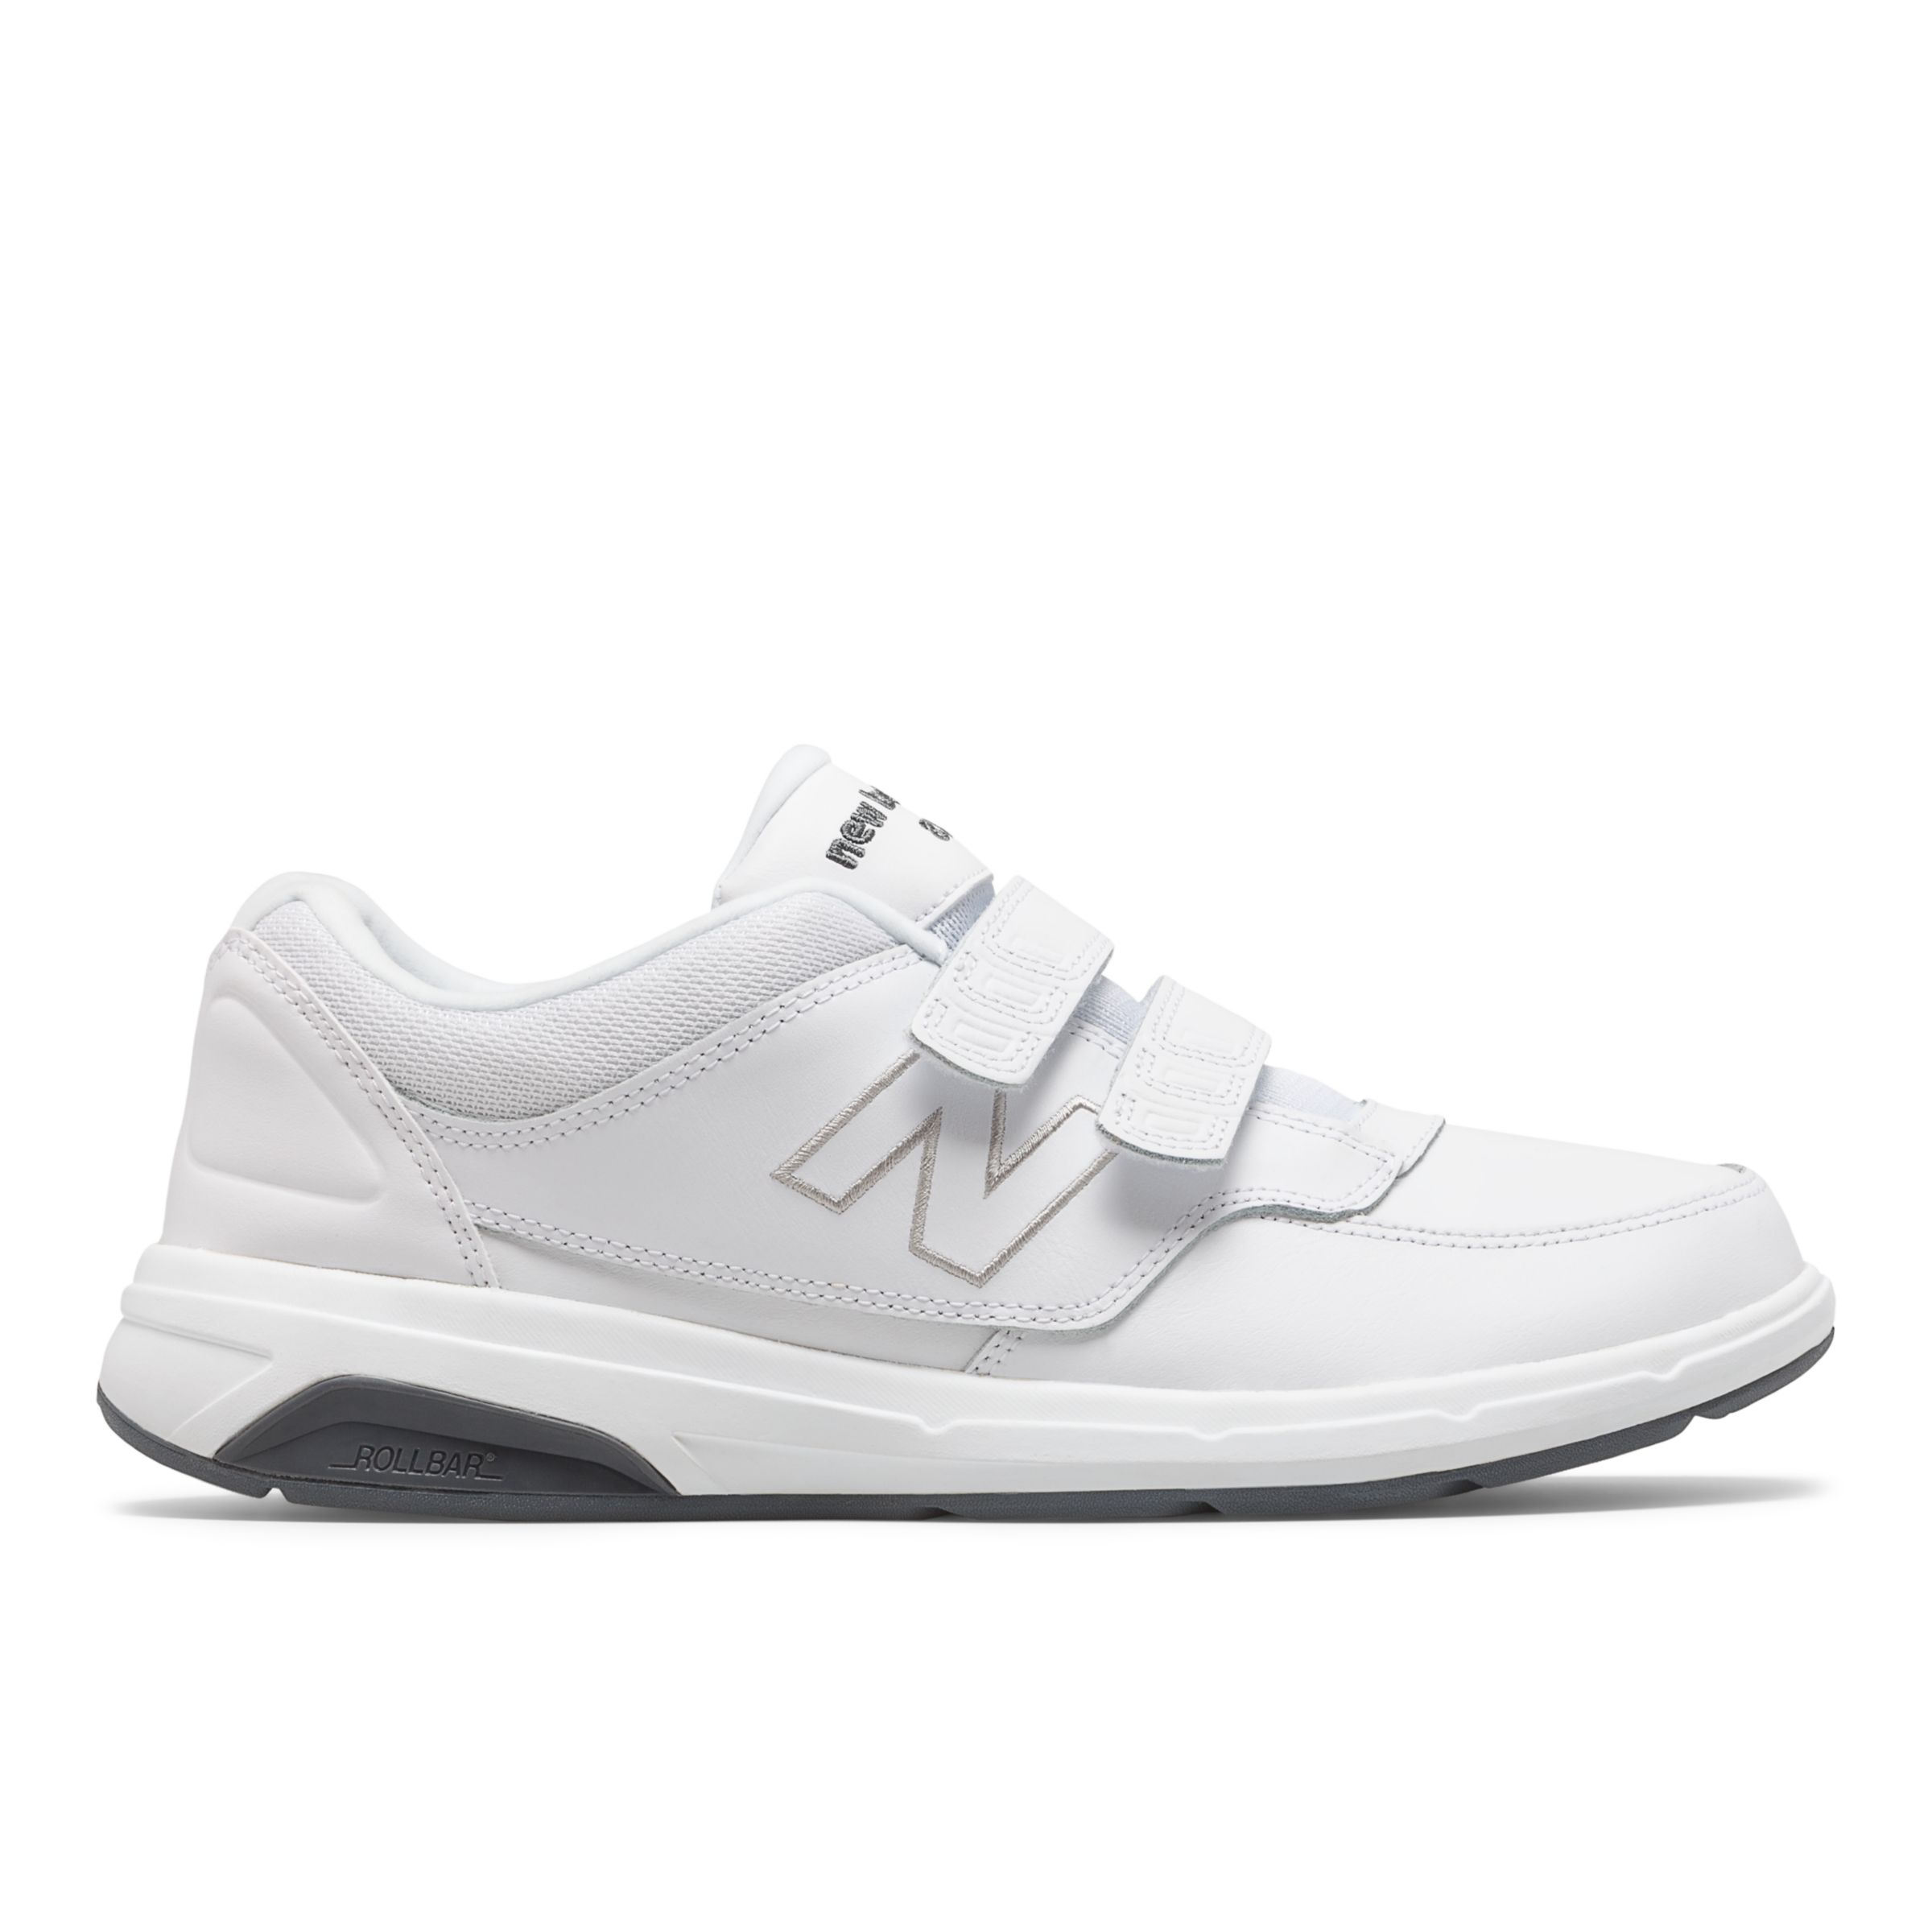 new balance velcro strap mens shoes,OFF 76%,www.concordehotels.com.tr